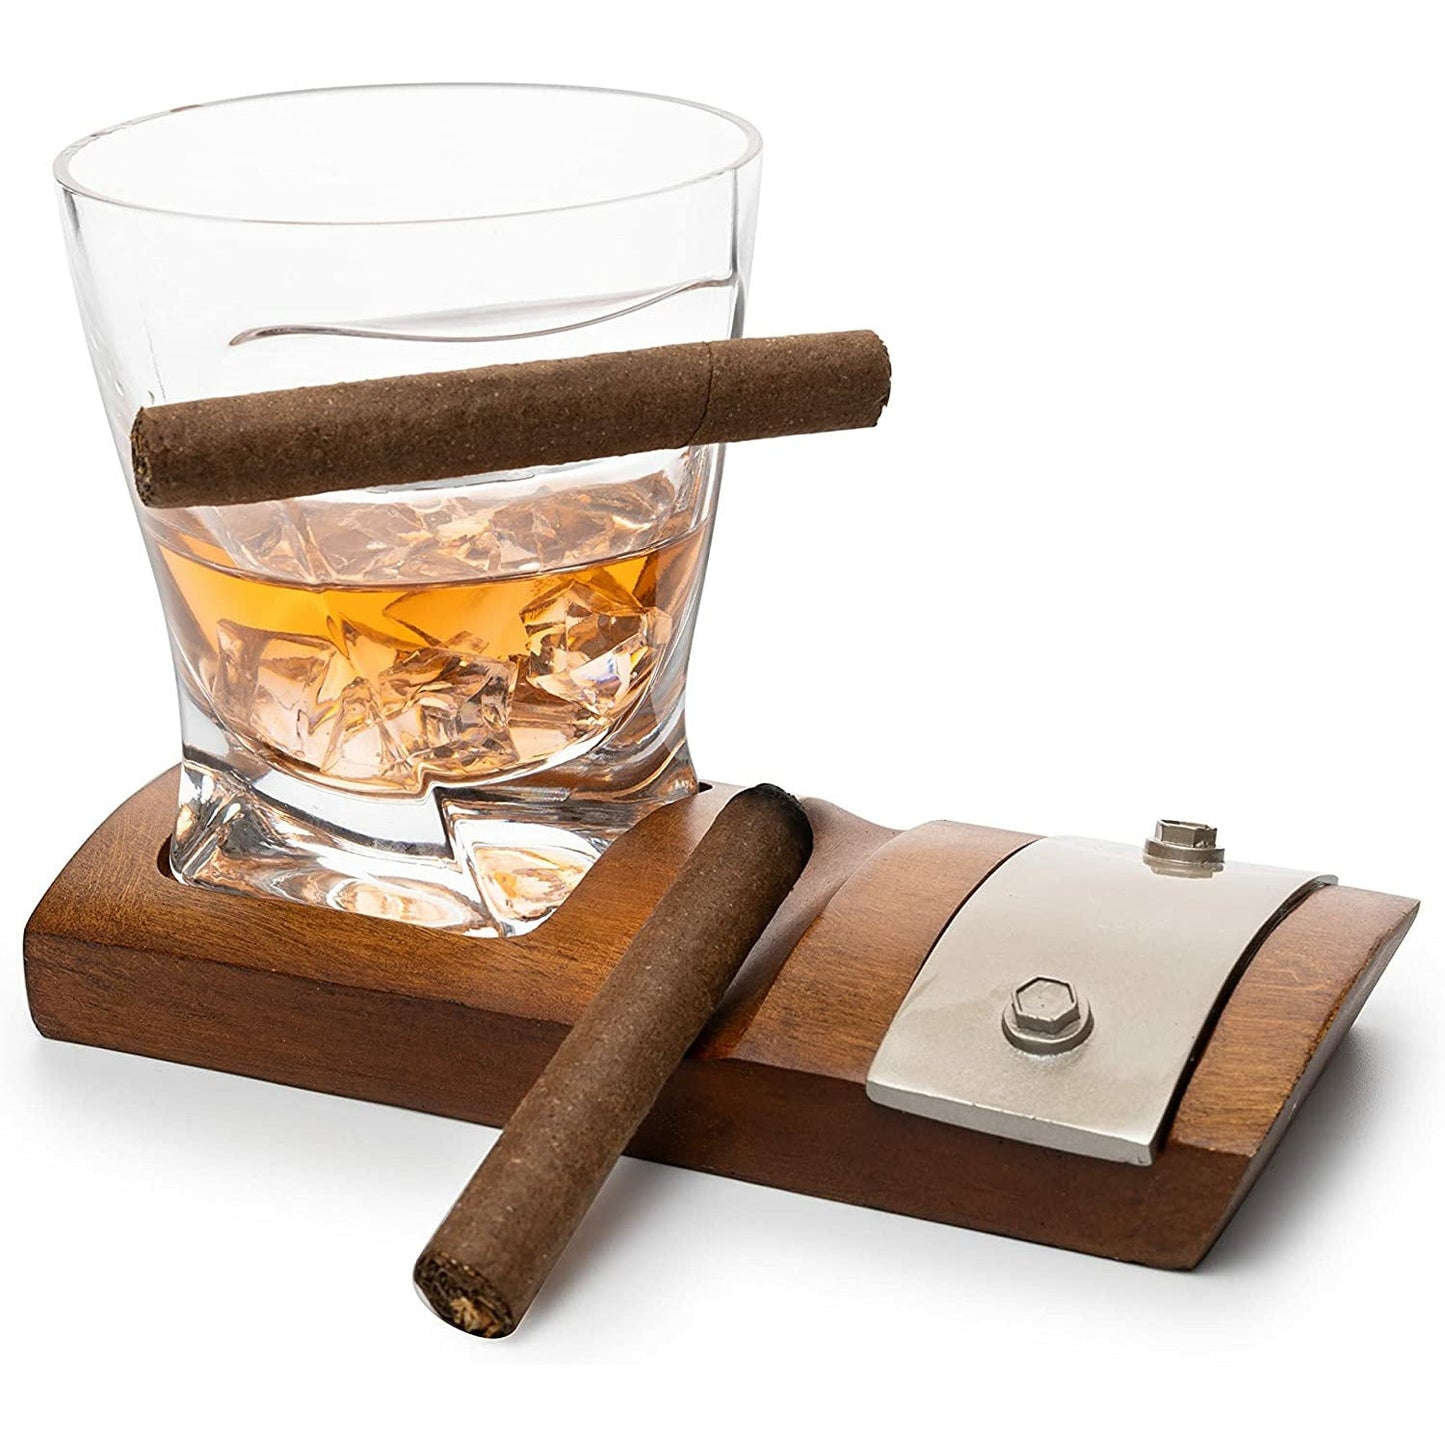 The Wine Savant Glass & Coaster & with A Unique Whiskey Glass Slot to Hold Item, Whiskey Glass Gift Set, Item Rest, Accessory Set Gift for Dad, Men Home Office Decor Gifts, Fathers Day - Chirstmas-0